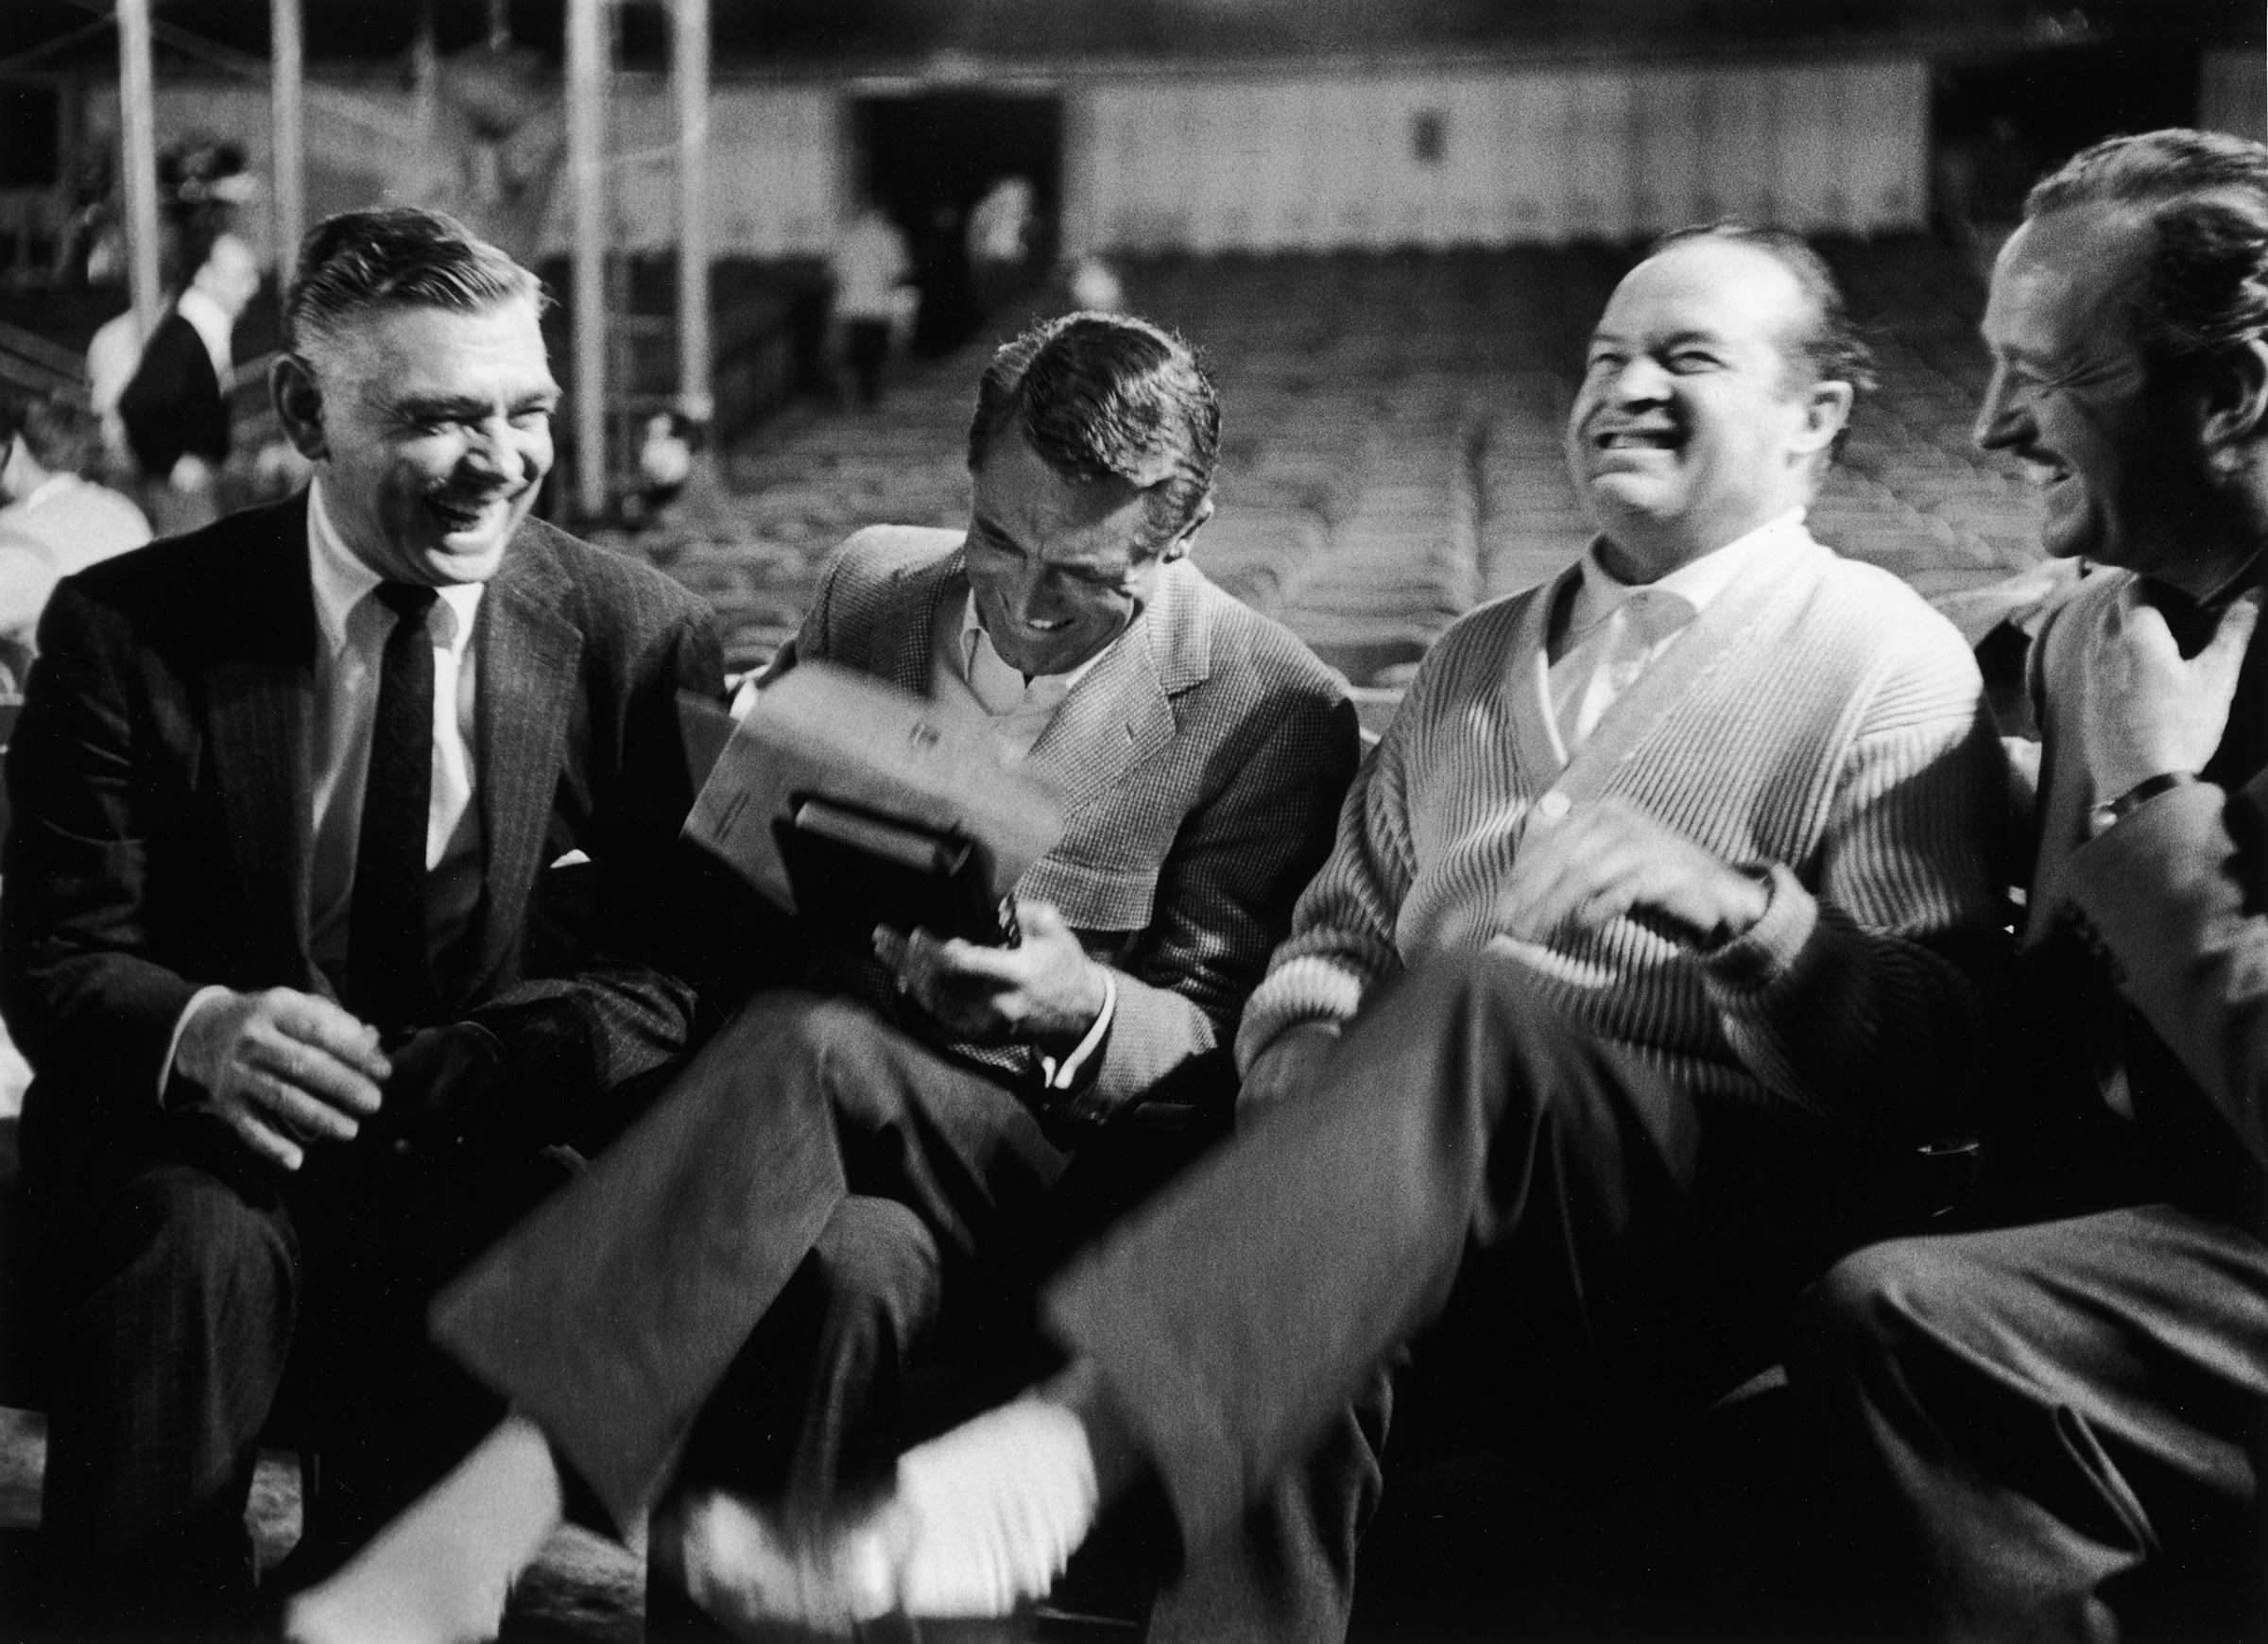 Clark Gable, Cary Grant, Bob Hope and David Niven share a laugh during a break from rehearsals for the 30th Academy Awards, 1958.